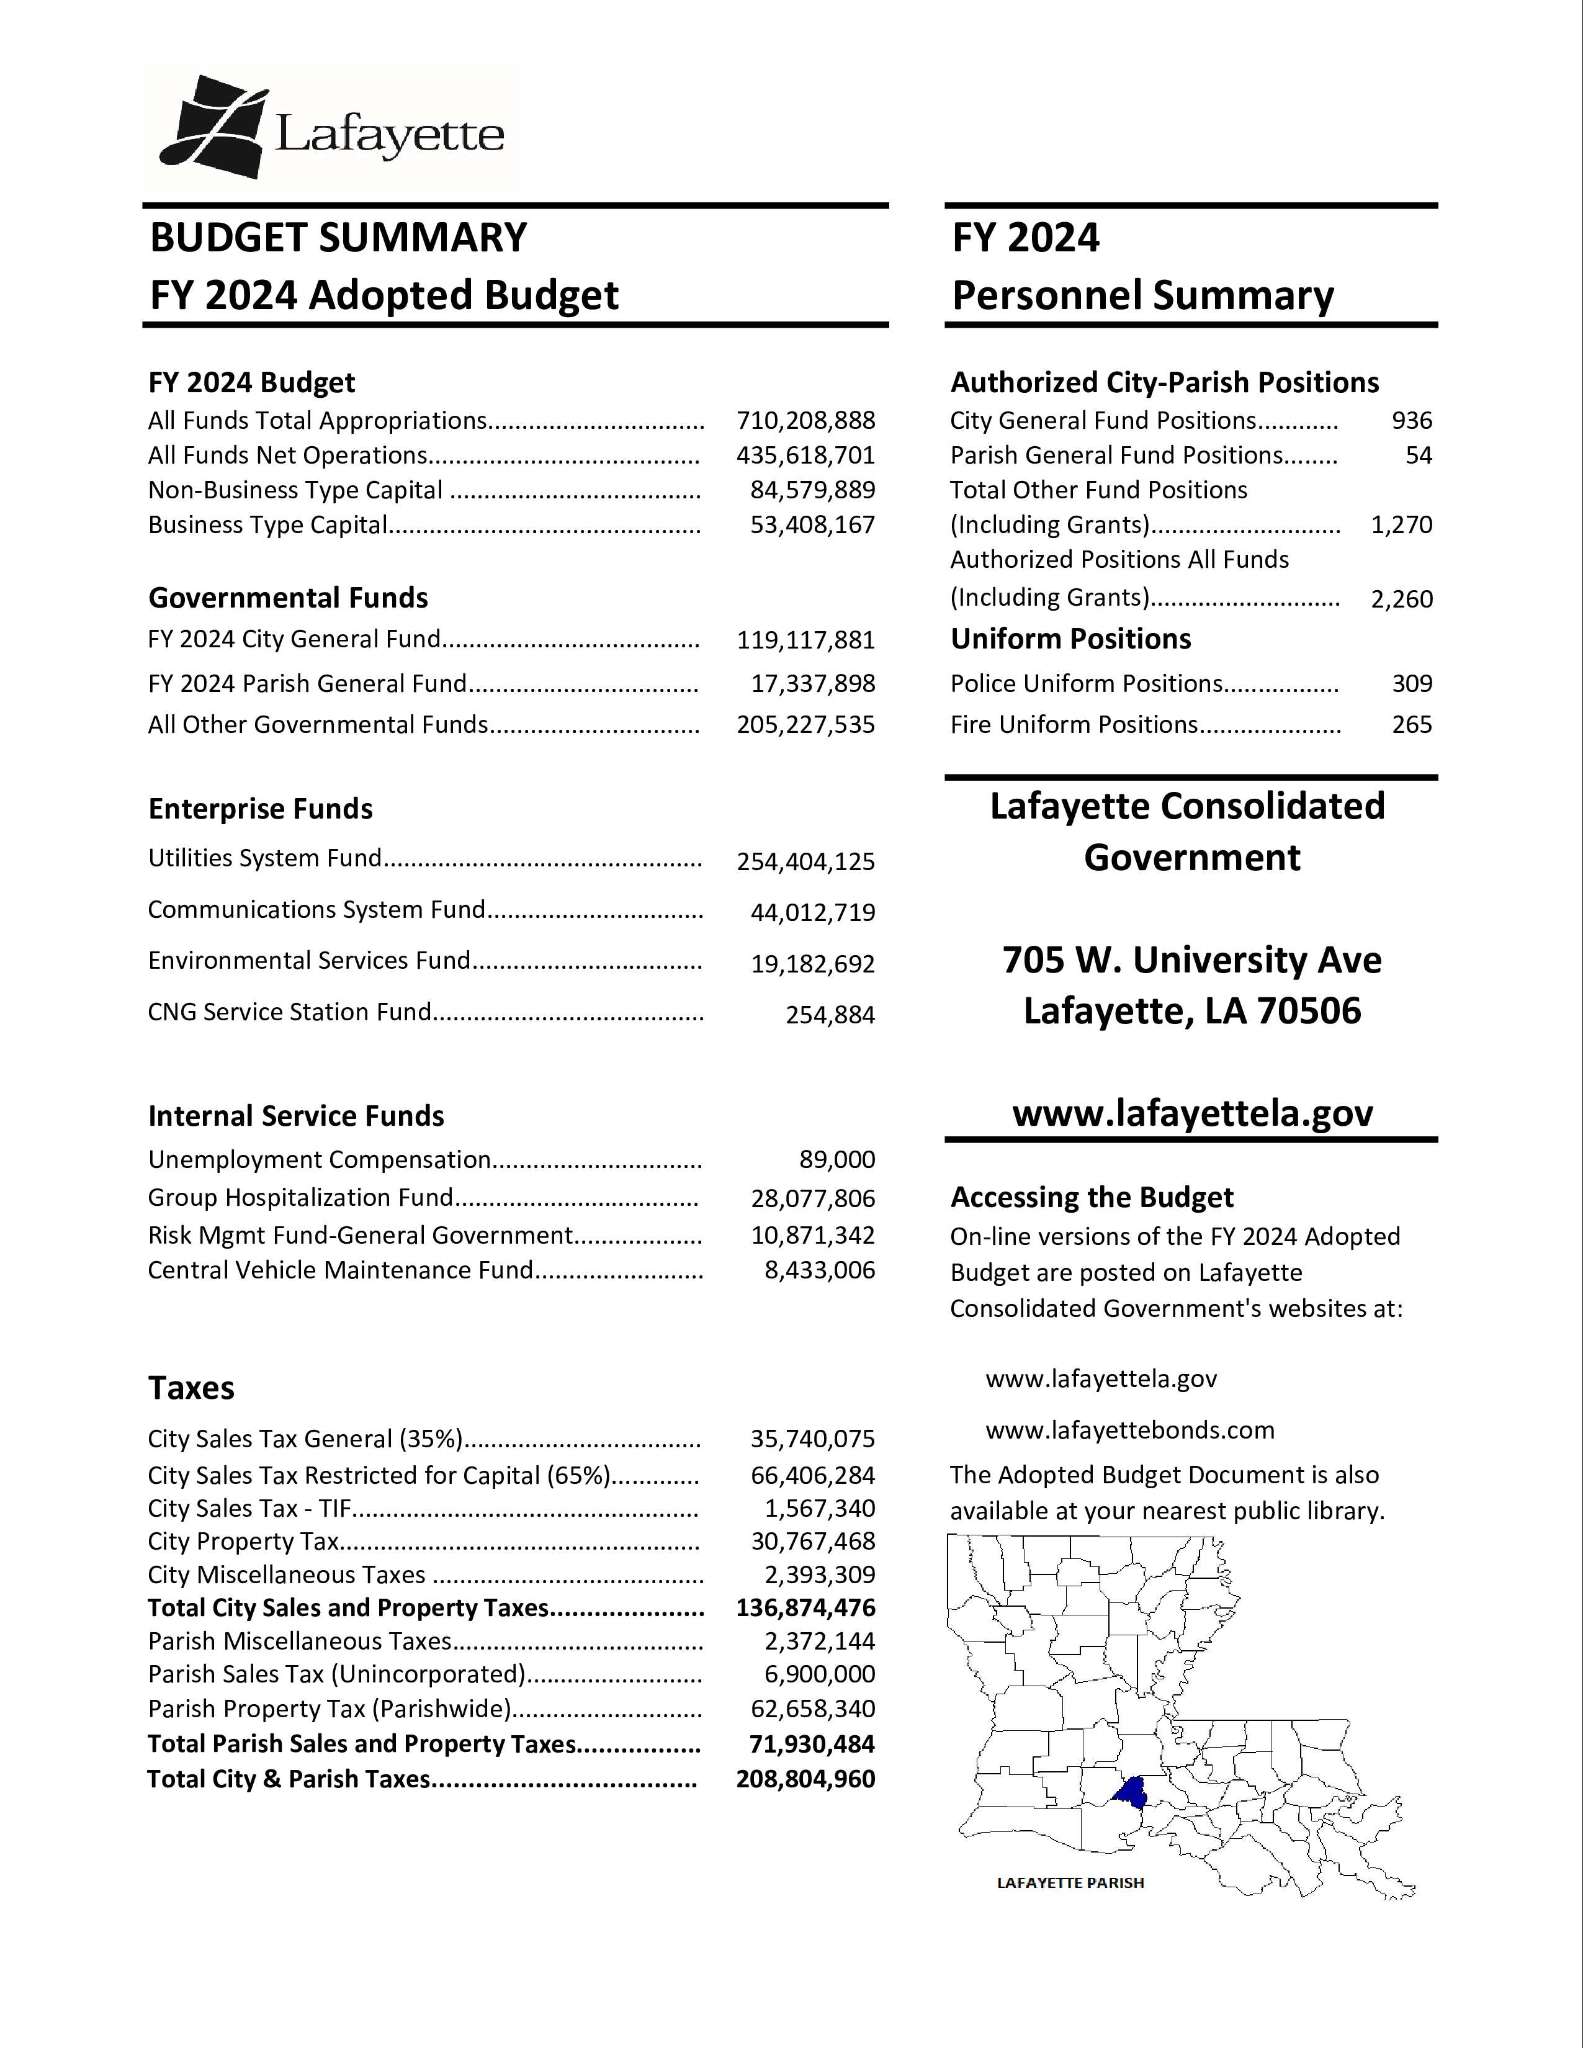 FY 2024 Adopted Budget Facts